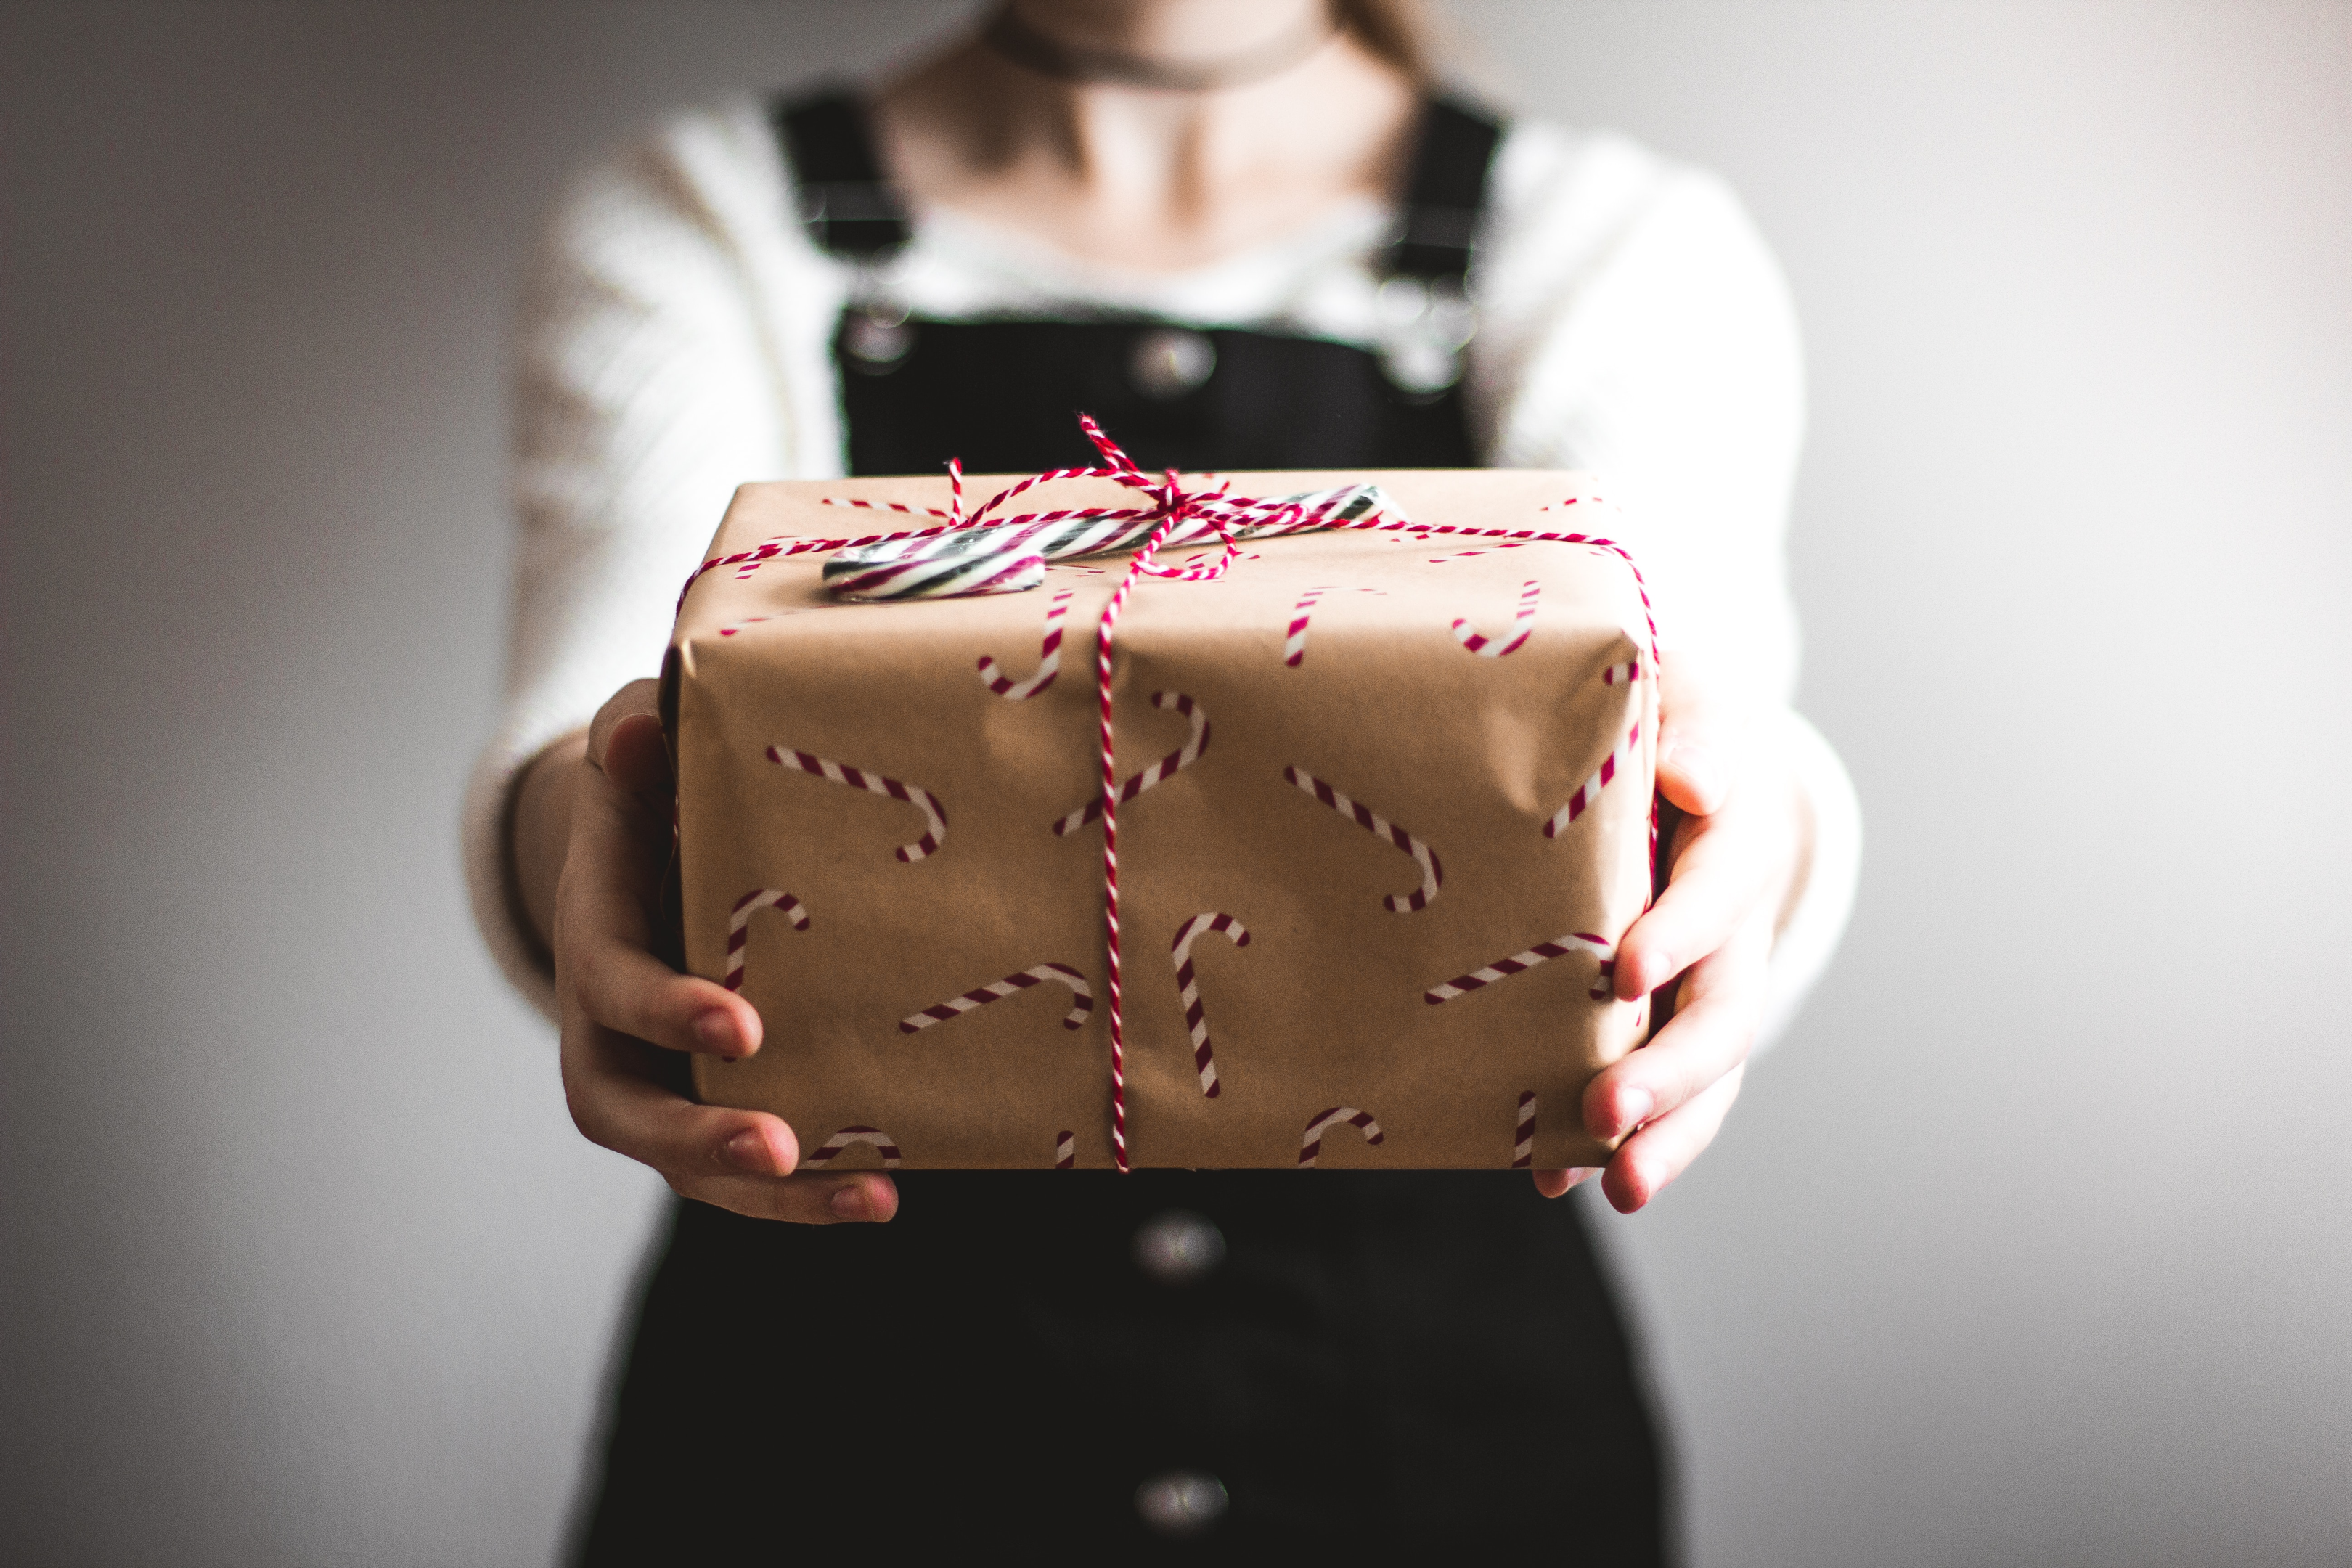 Unique Christmas Gift Ideas for Church Members